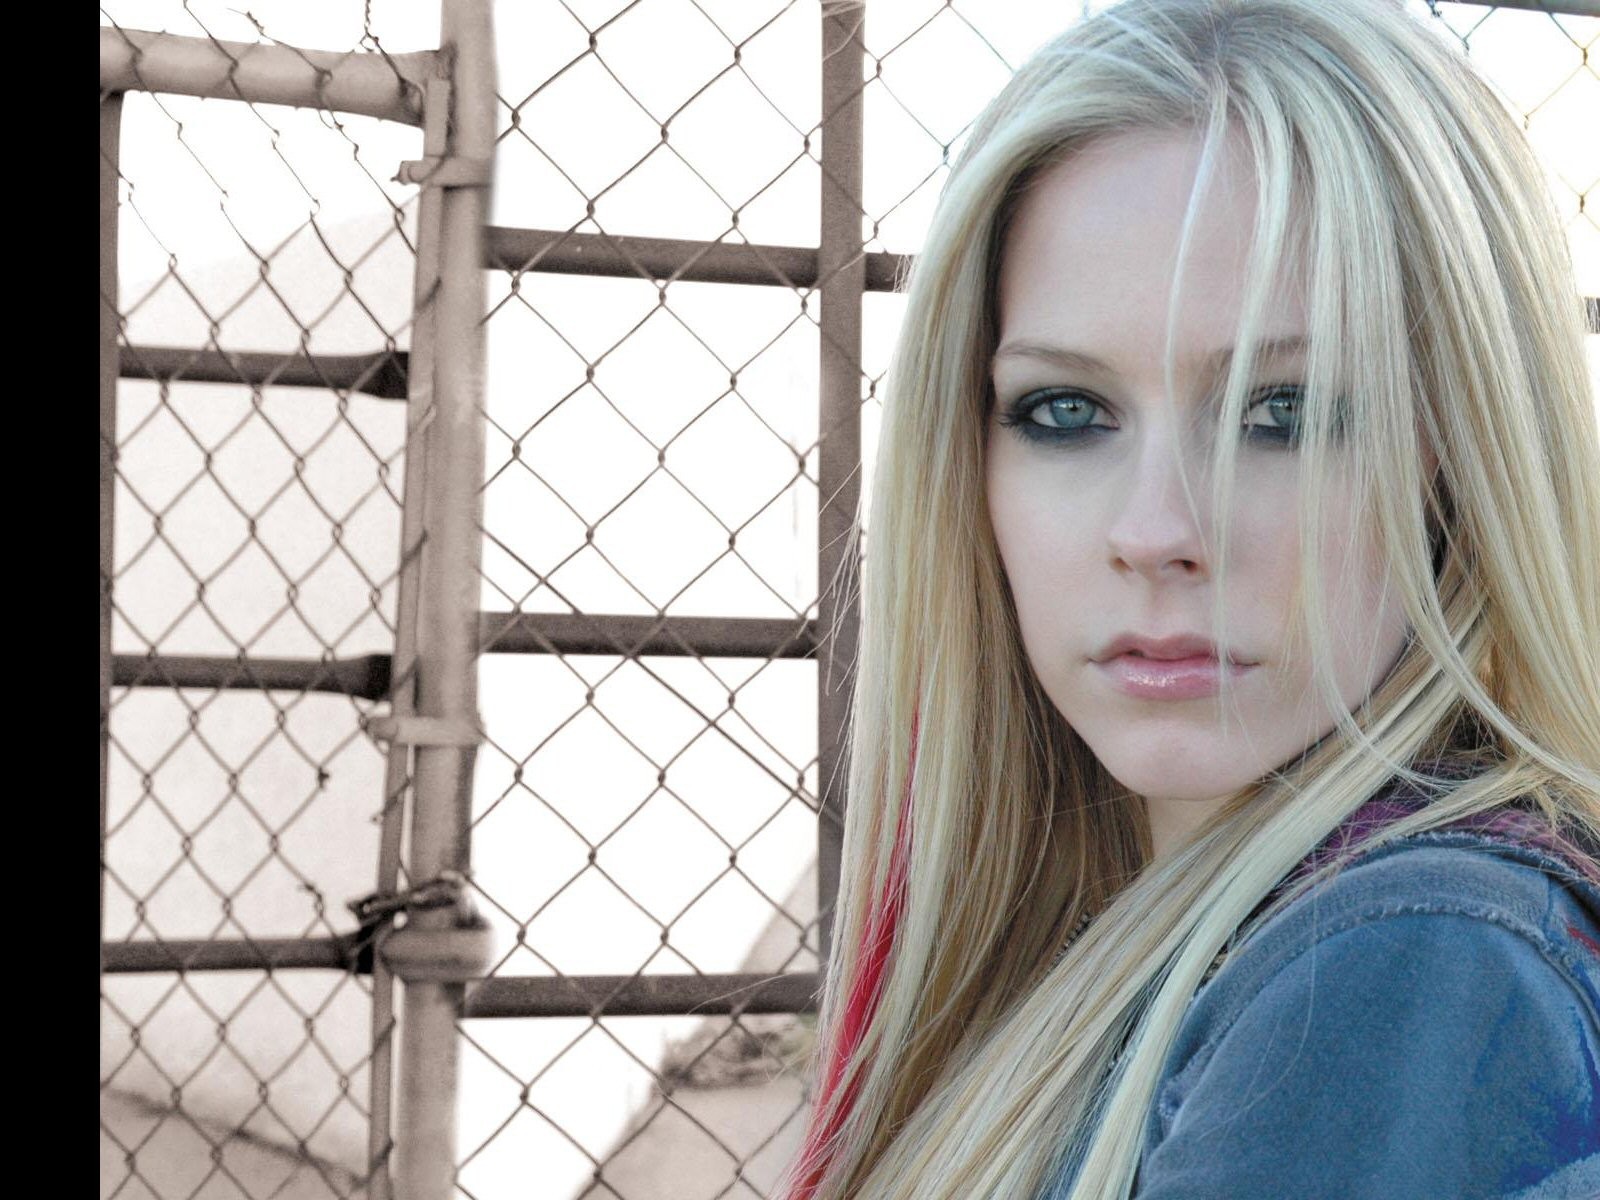 People 1600x1200 Avril Lavigne fence singer face looking at viewer women outdoors women outdoors urban makeup smoky eyes celebrity closeup